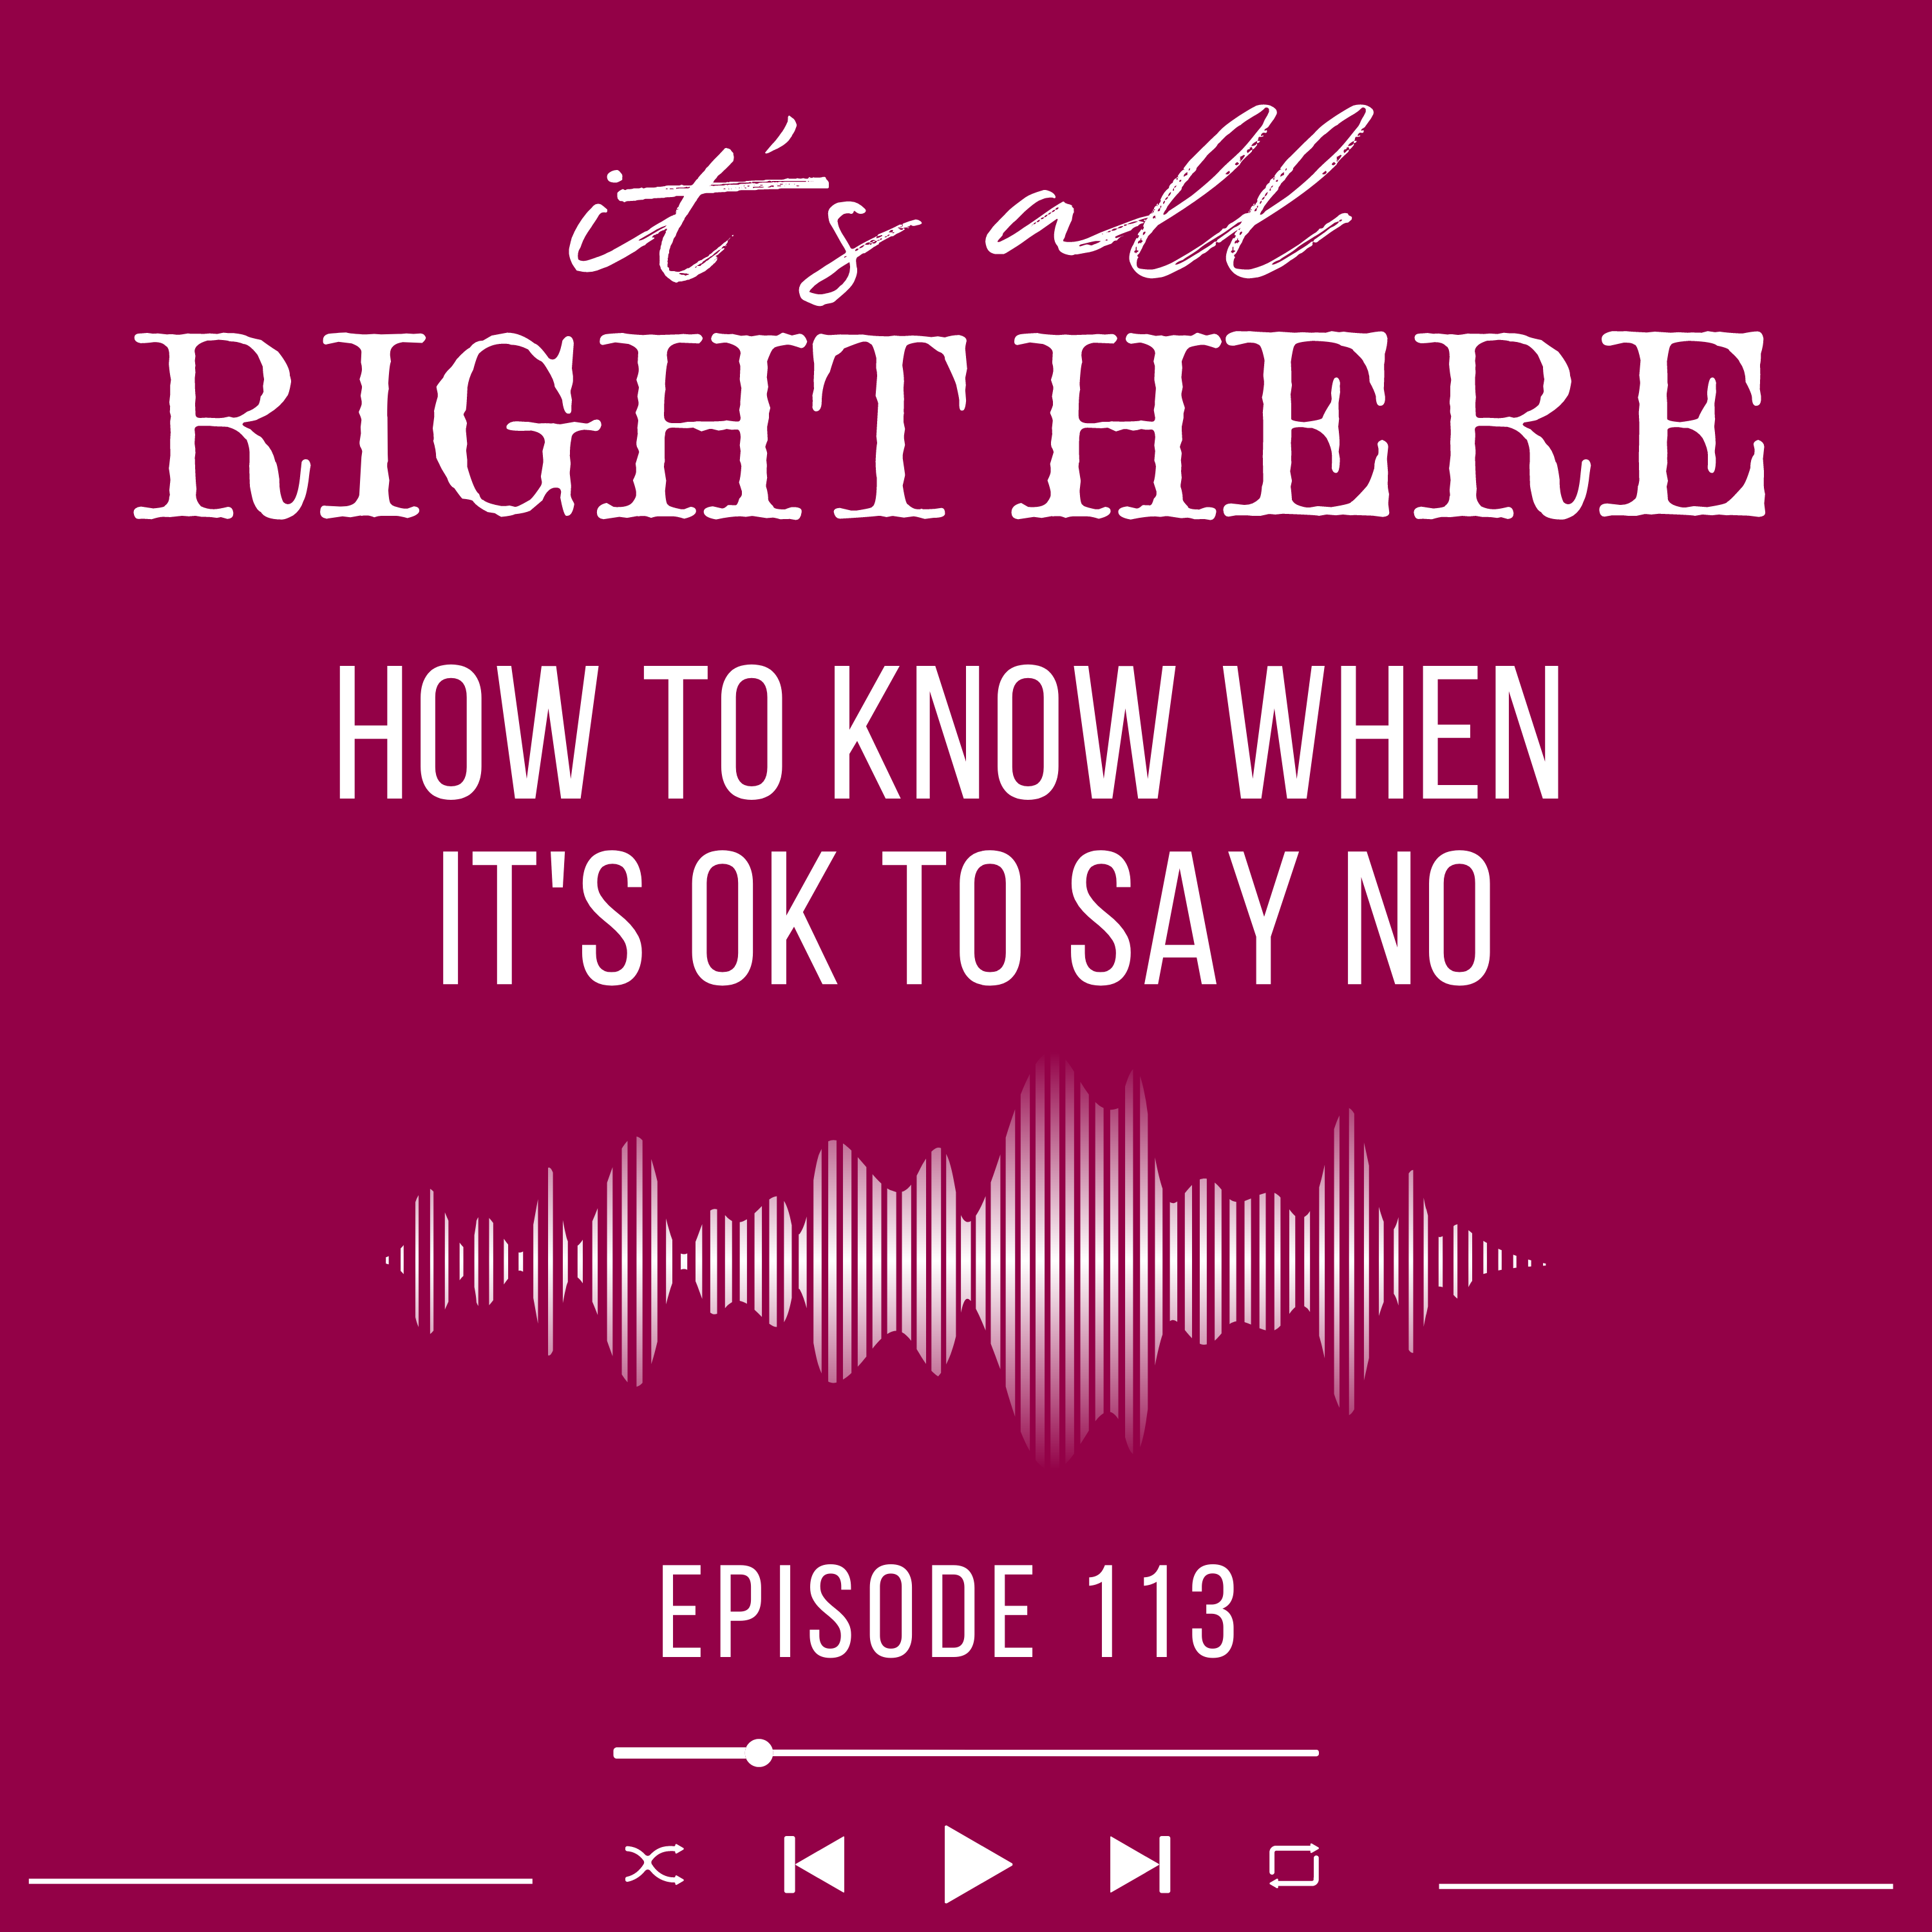 How to know when it's OK to say NO